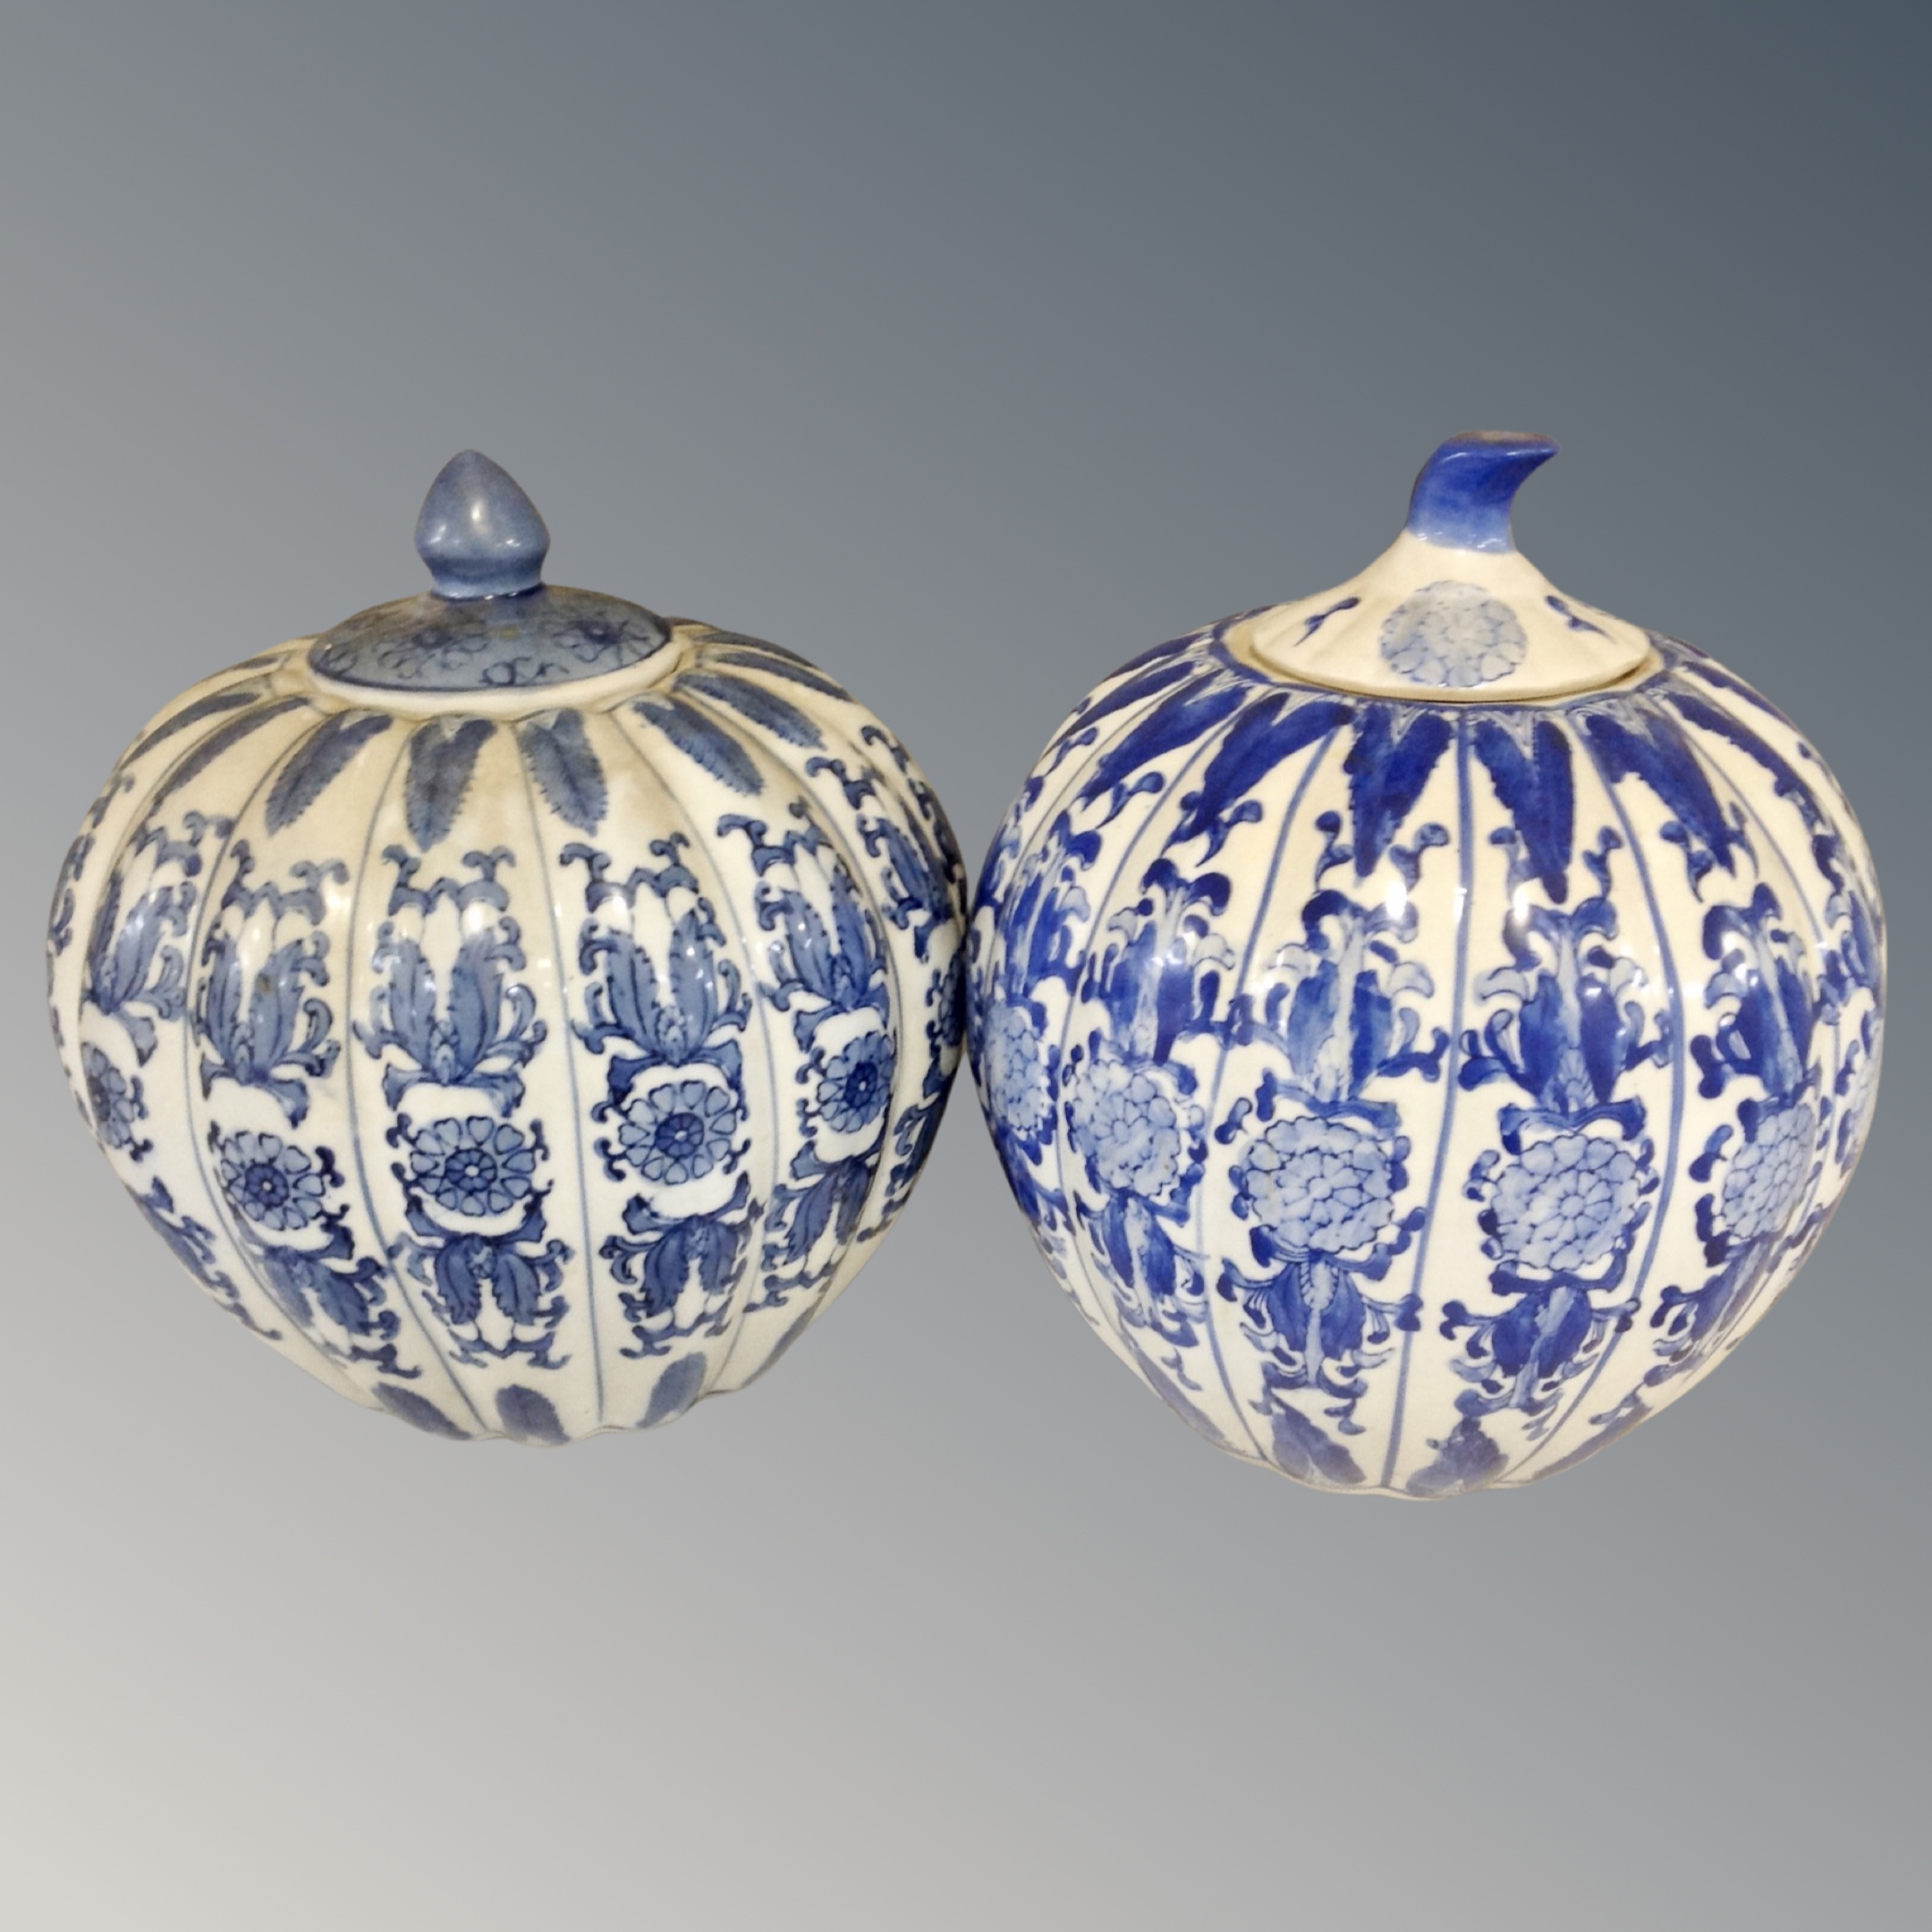 Two Chinese style blue and white pumpkin vases